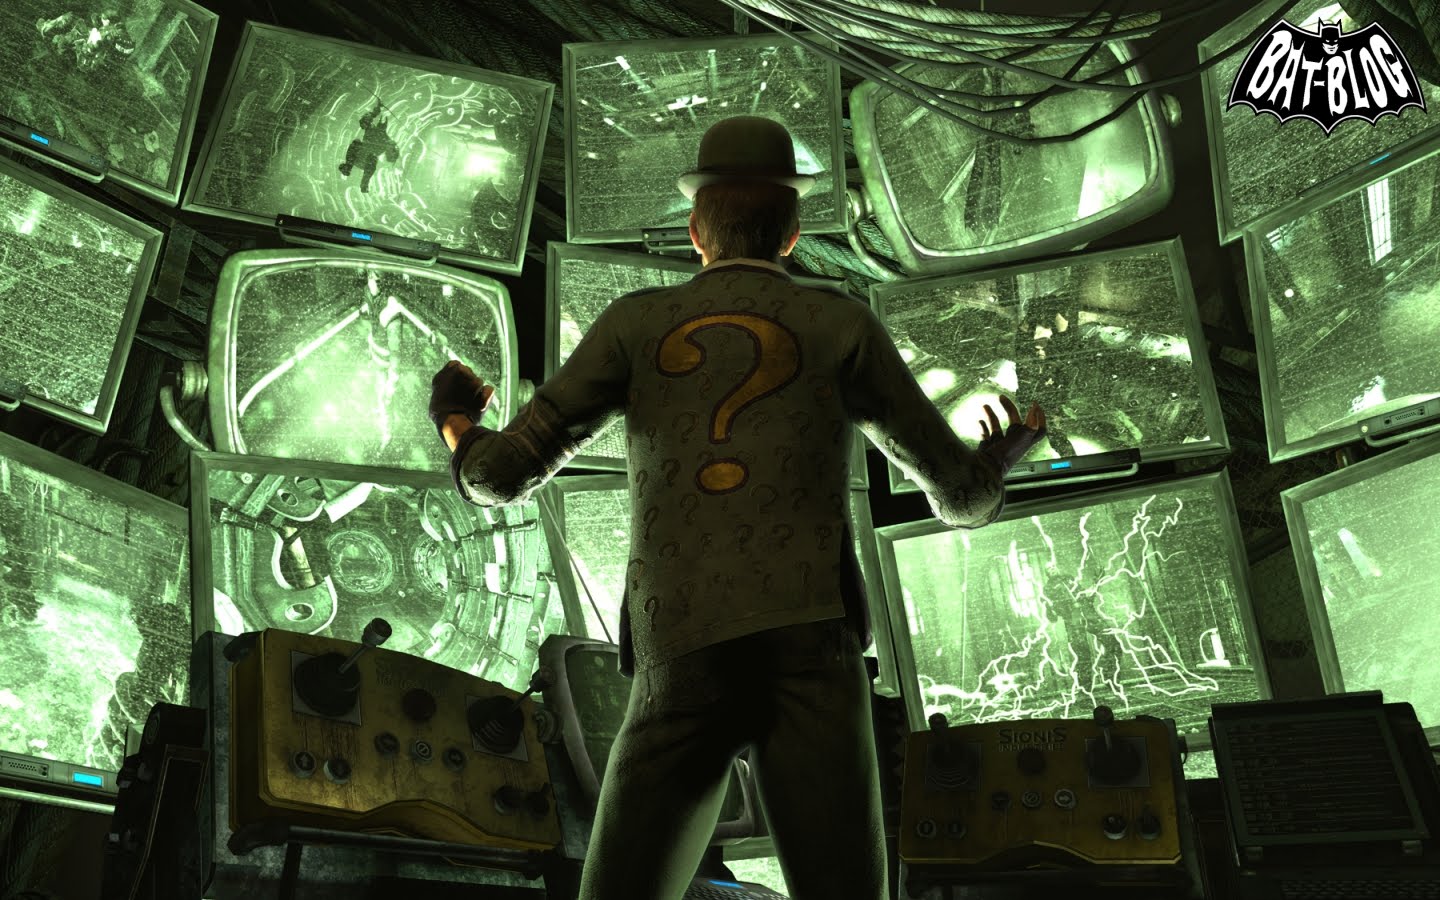 riddler wallpaper,action adventure game,pc game,adventure game,screenshot,fictional character